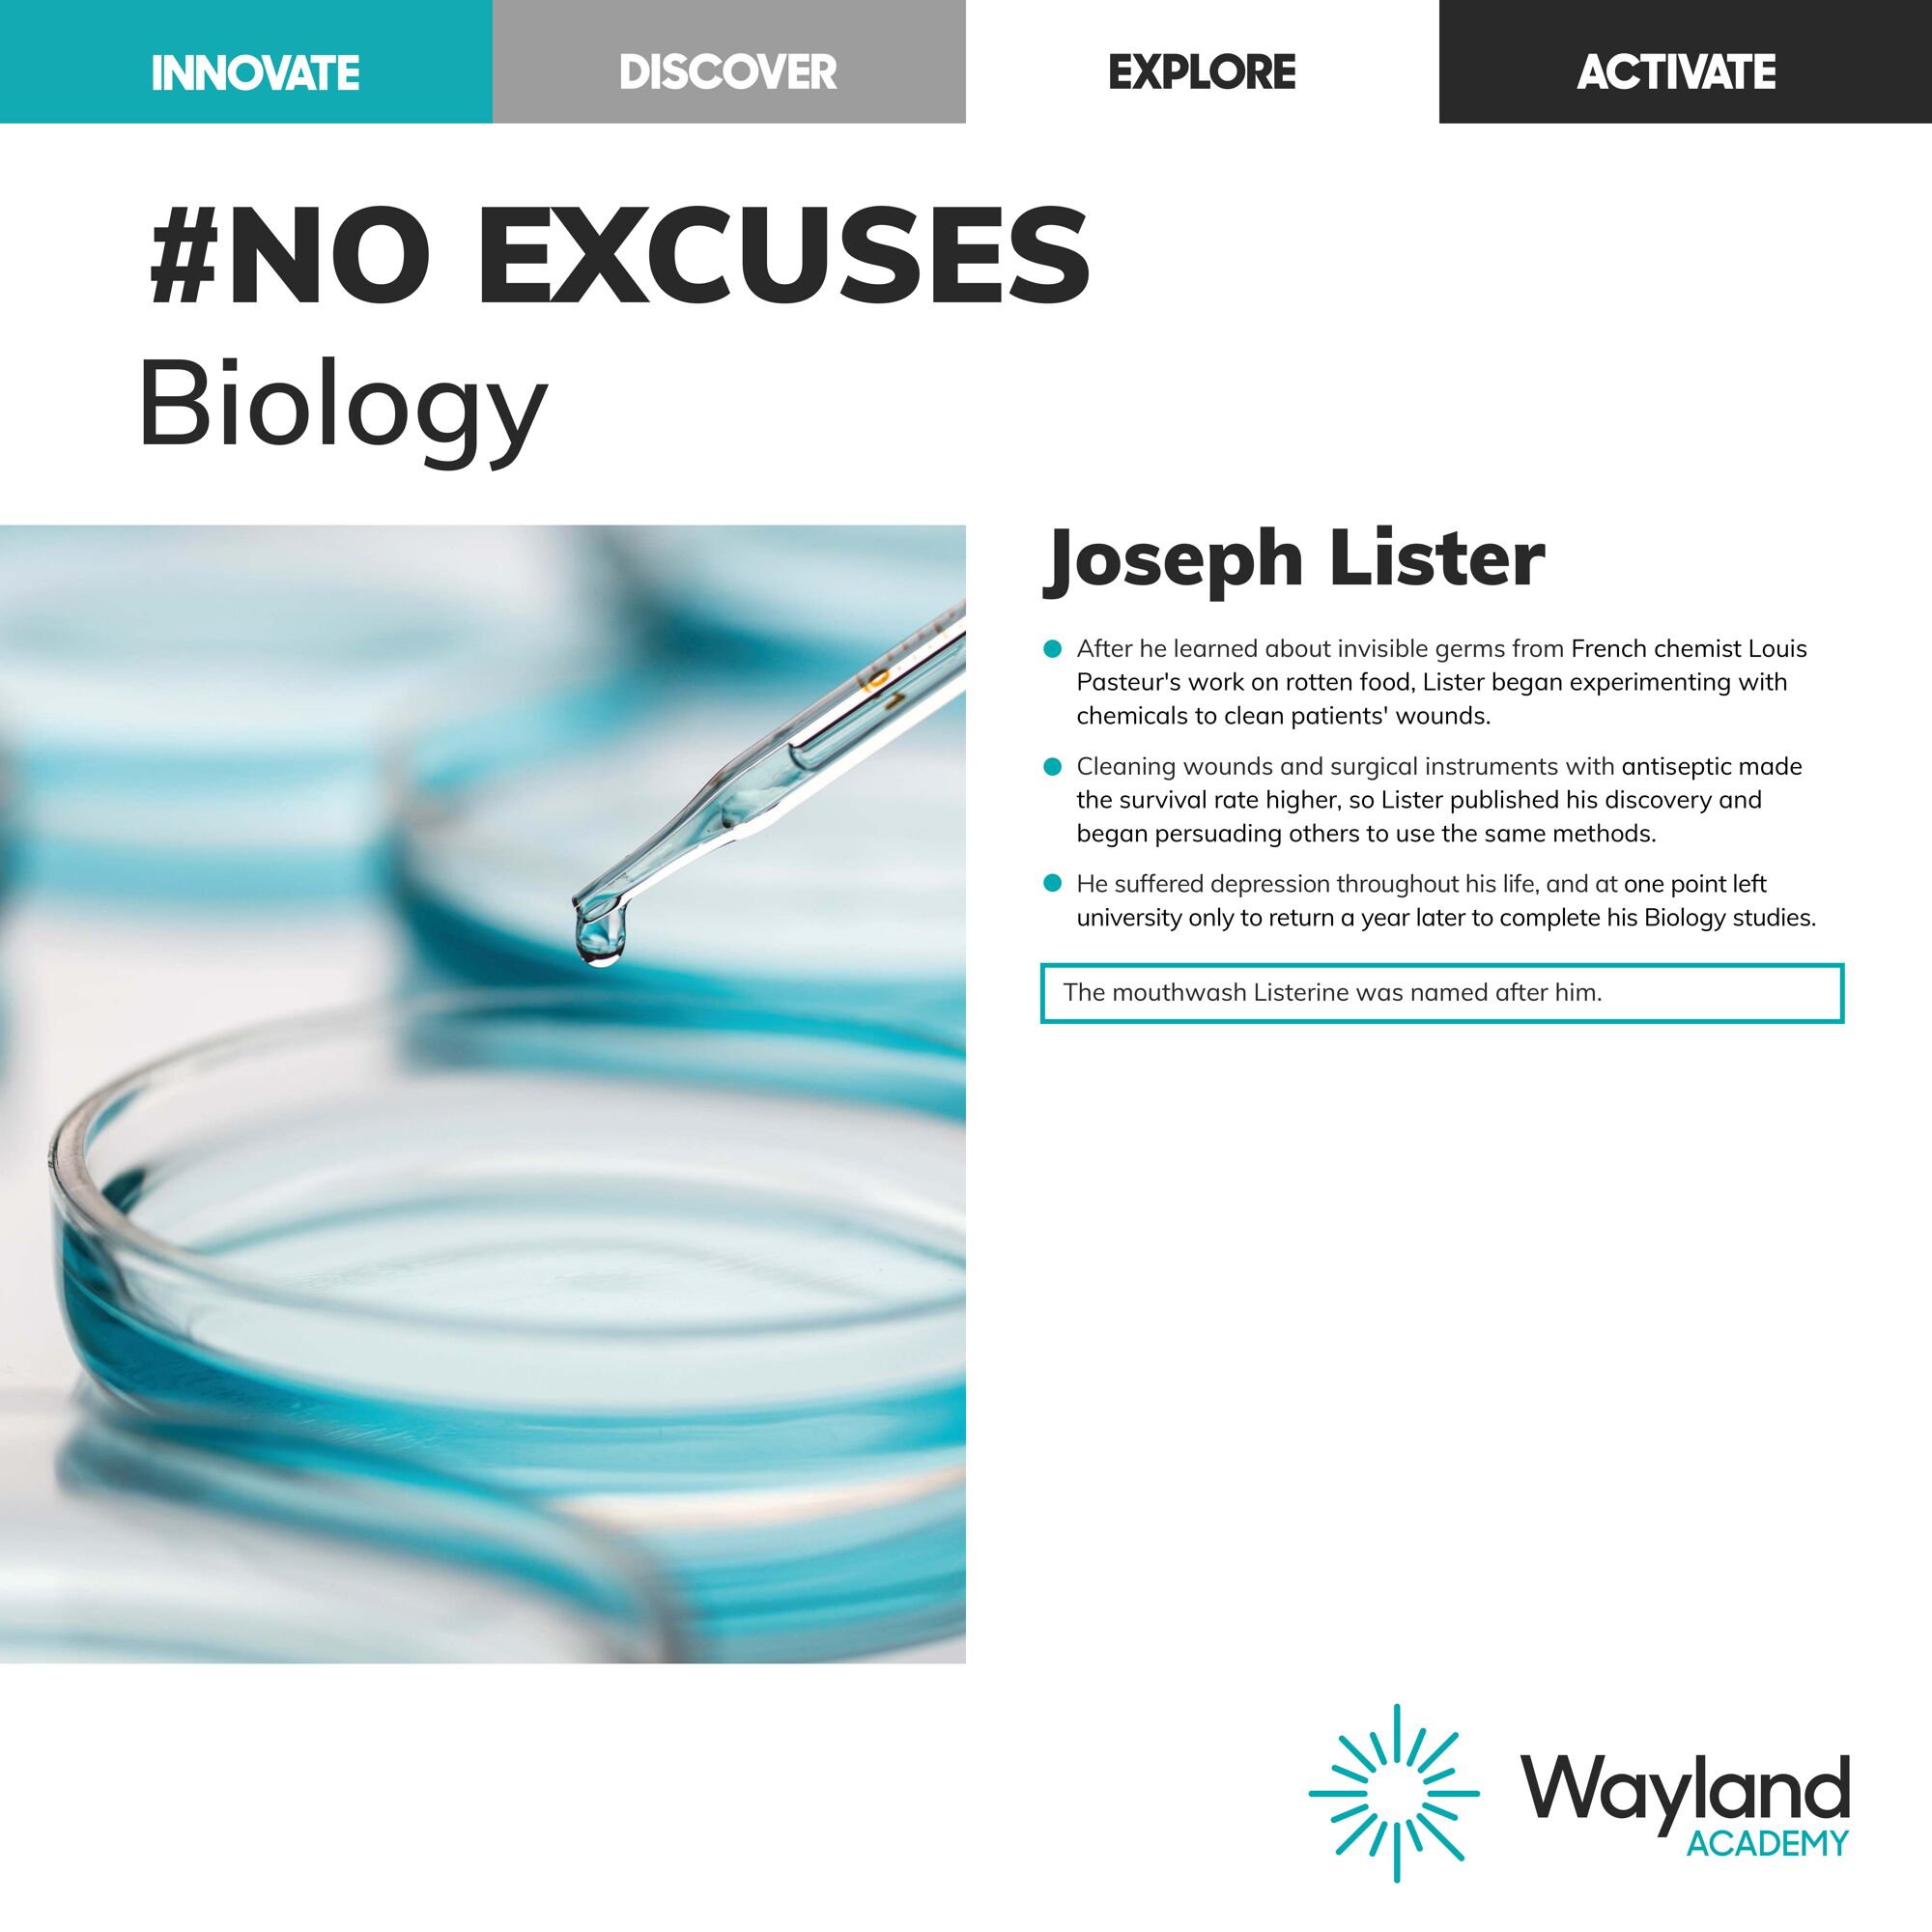 InspirationCurriculumCentre Wayland Academy Poster NoExcuseBiology [53810] page 0001